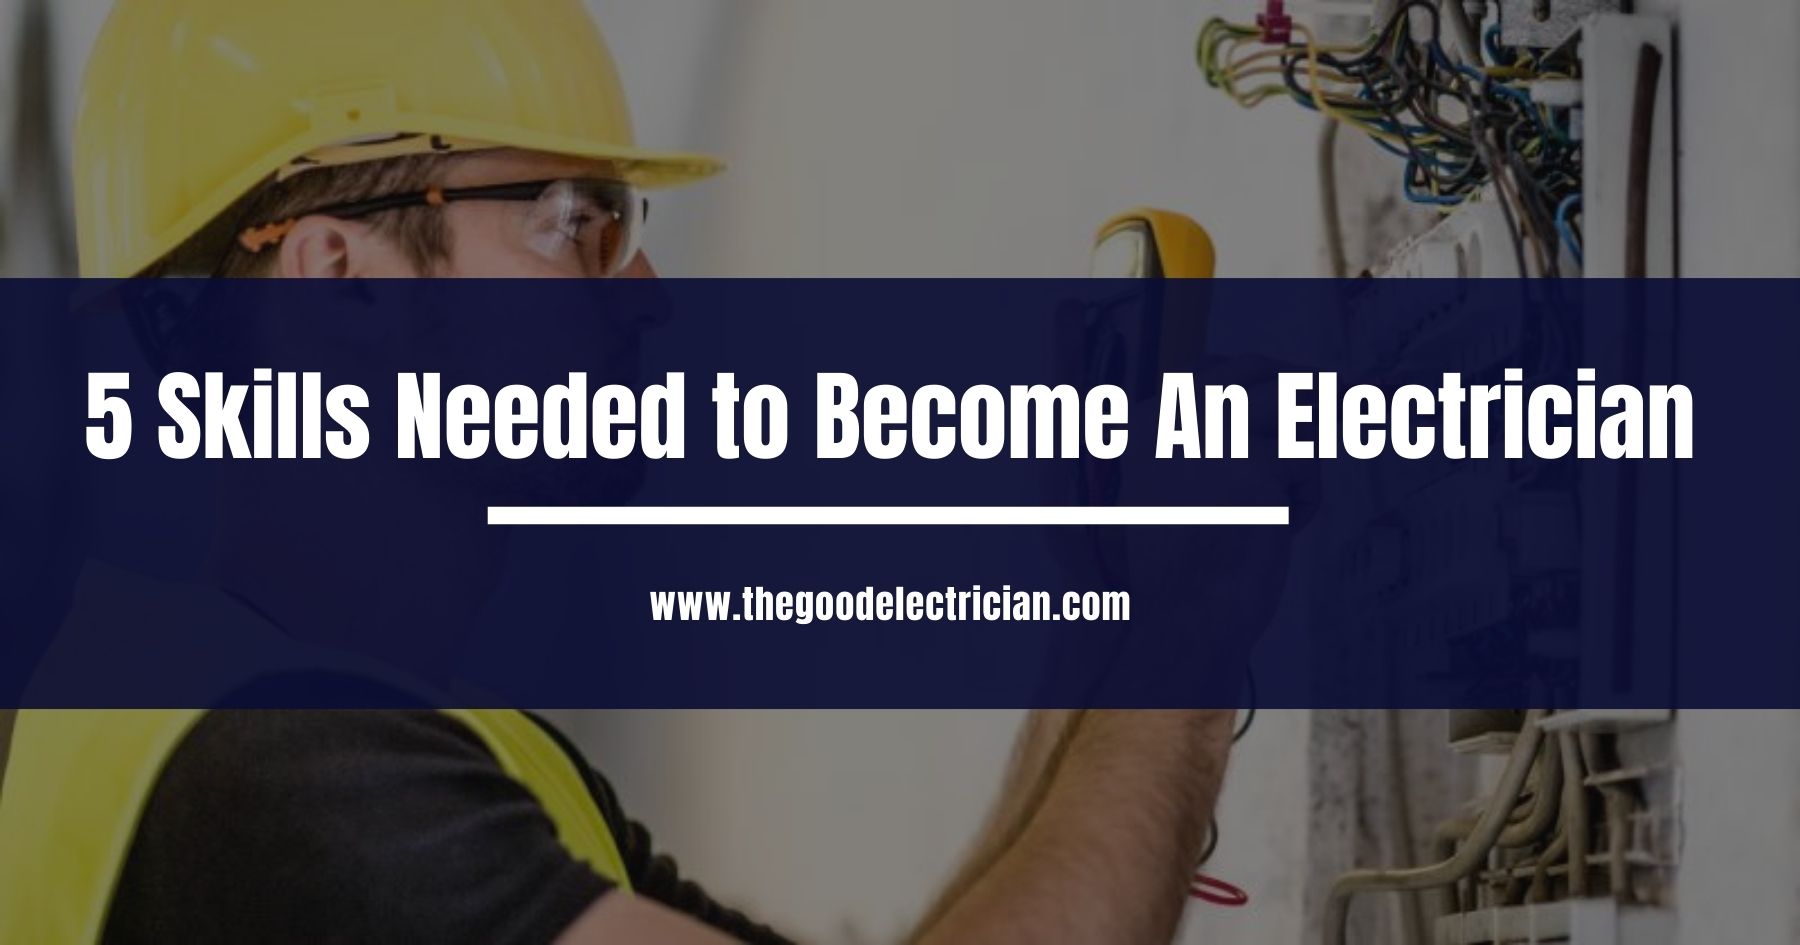 You are currently viewing 5 Skills Needed to Become An Electrician